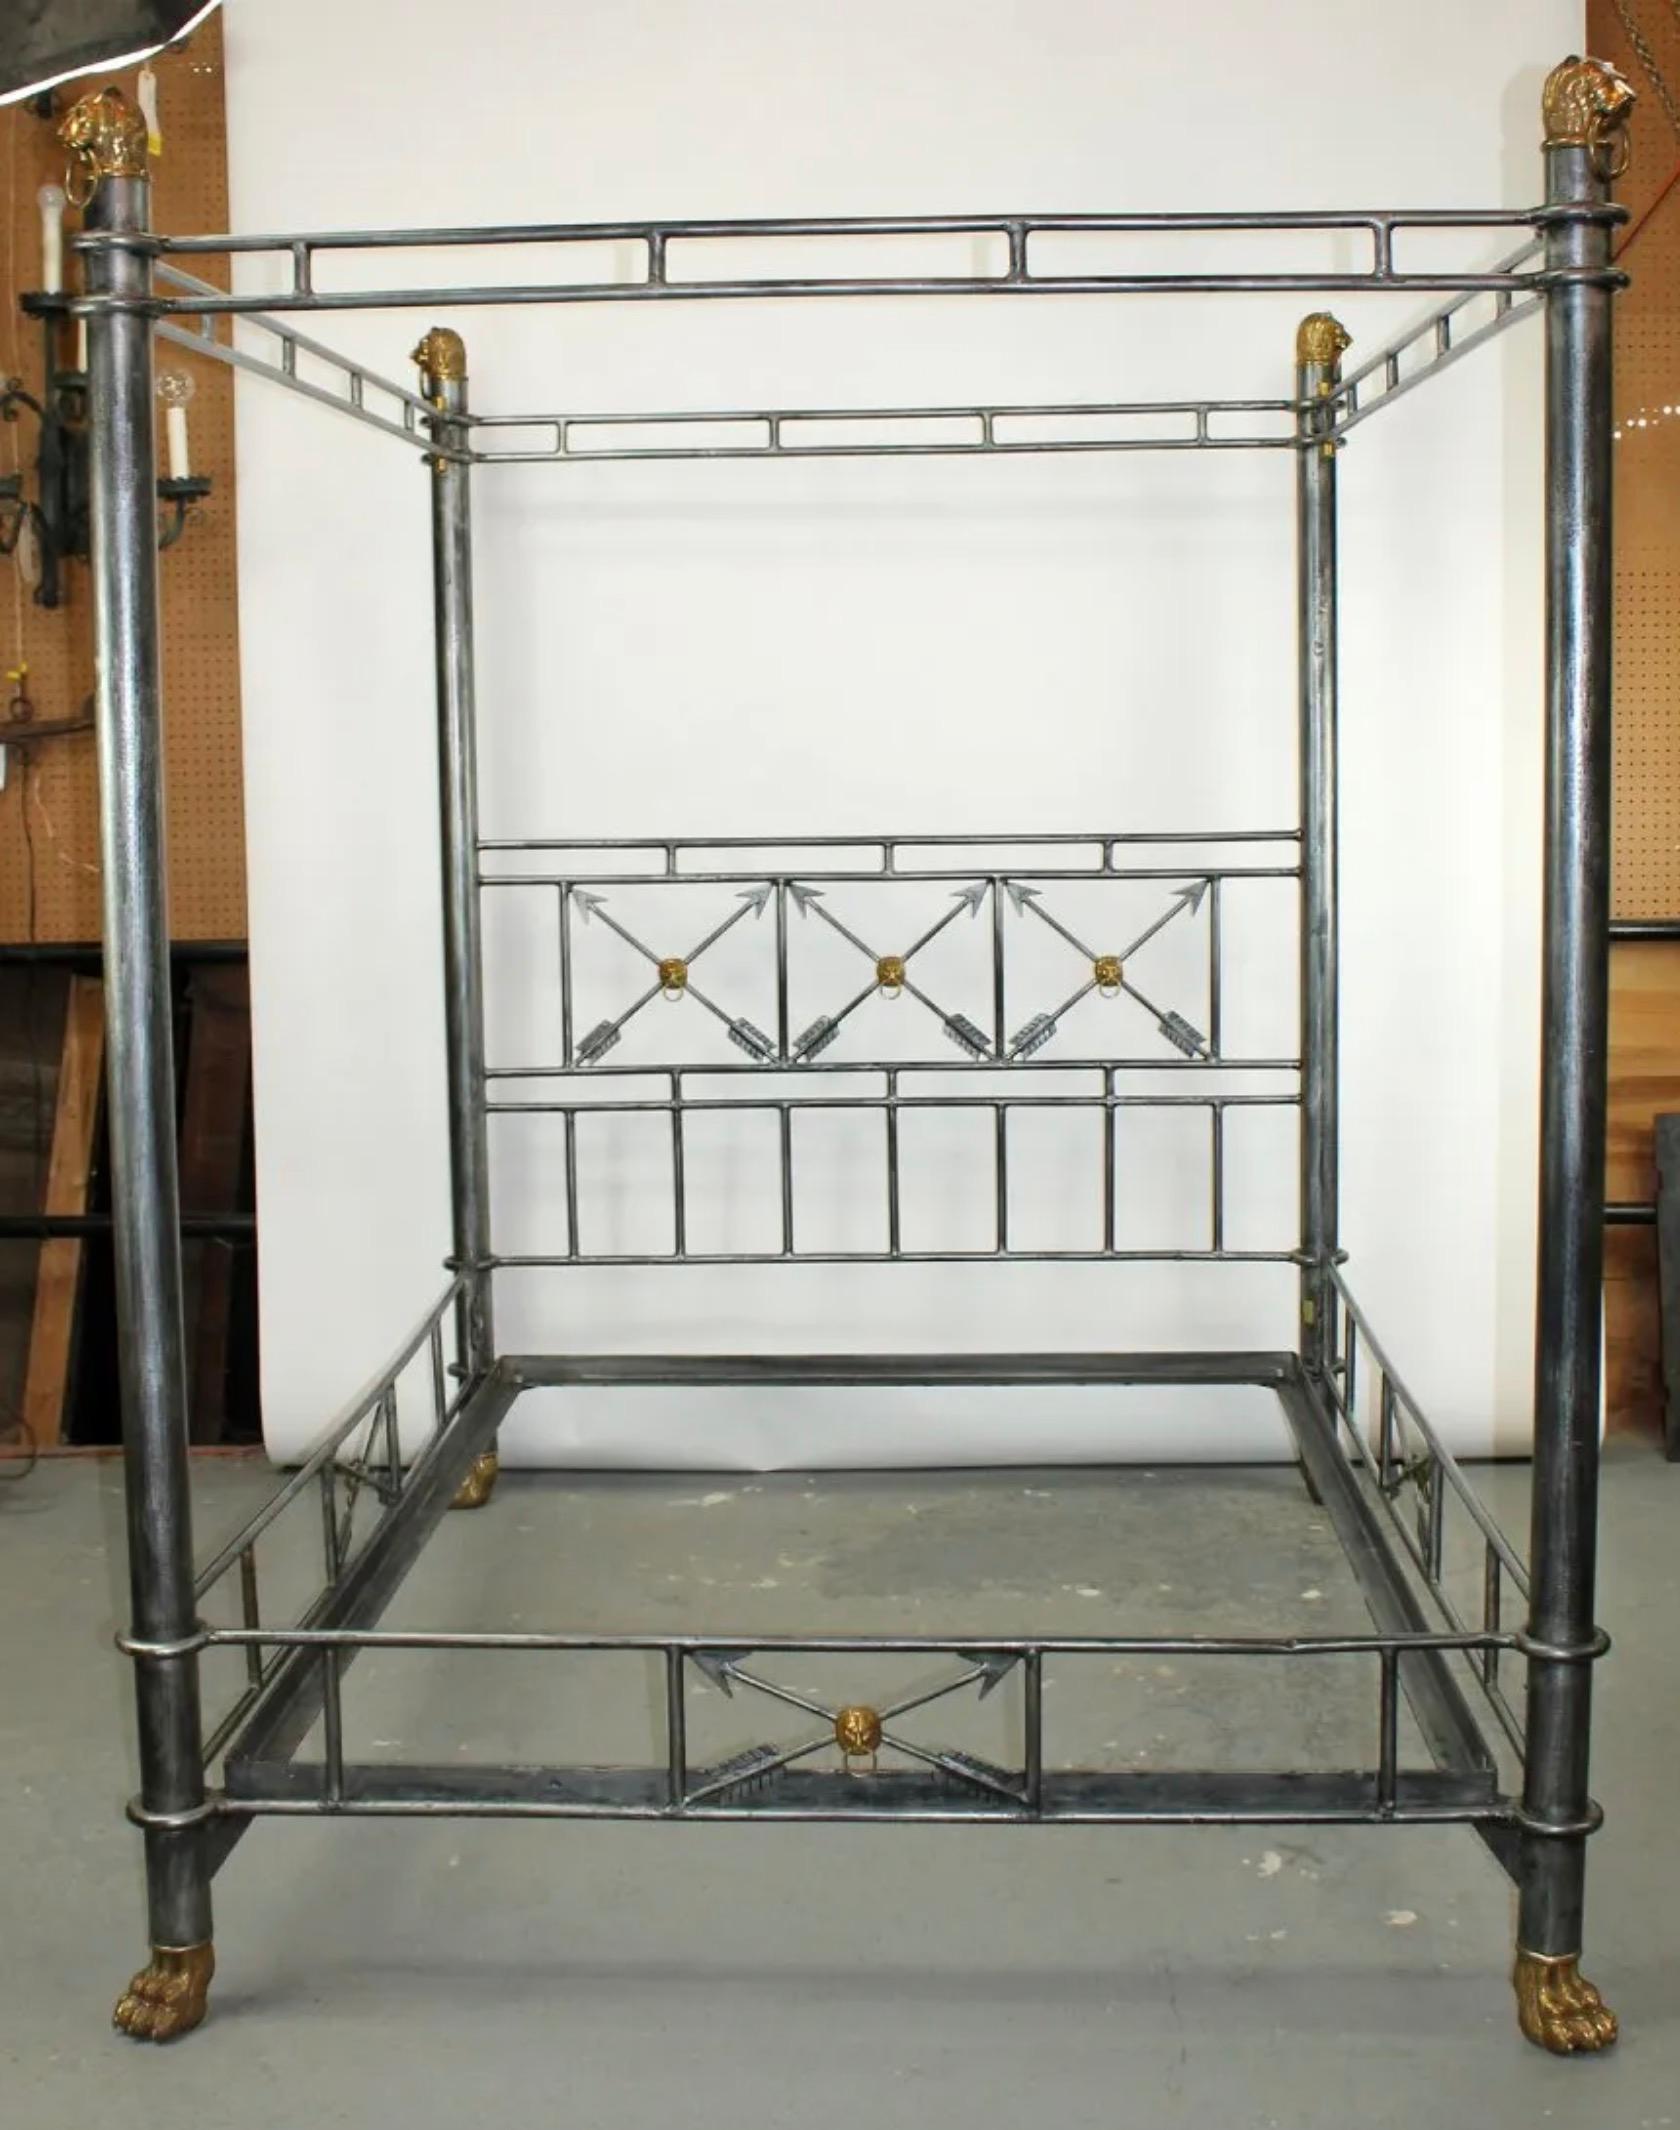 Hand forged iron queen sized canopy bed with brass lion heads, crossed arrows and paw feet. 